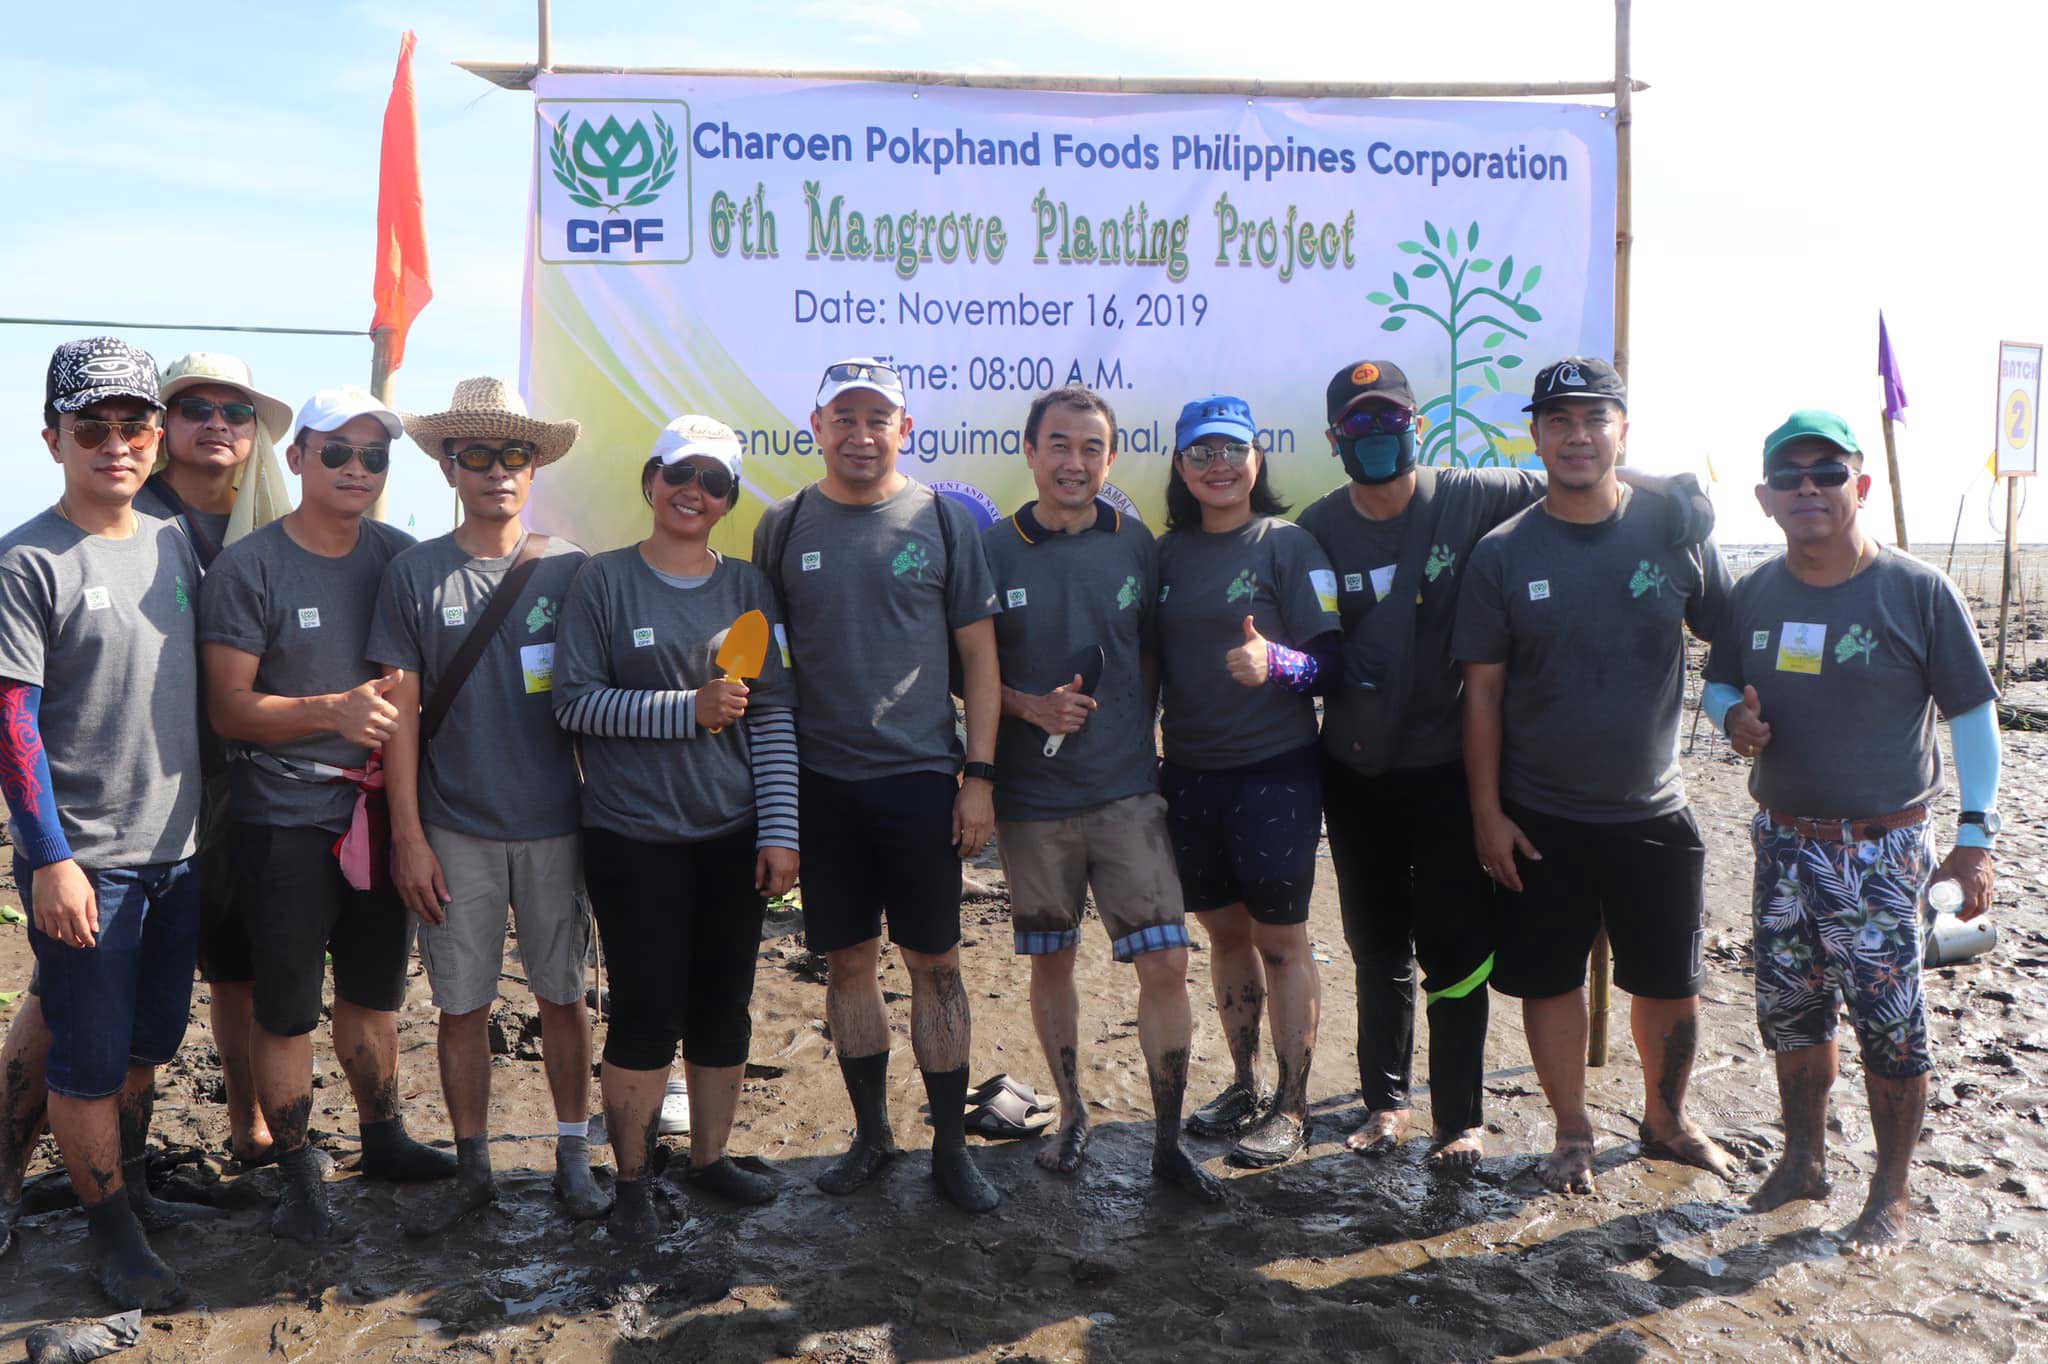 CPF Philippines joined hands with local government and communities to plant mangrove trees in the Philippines’ coastal area